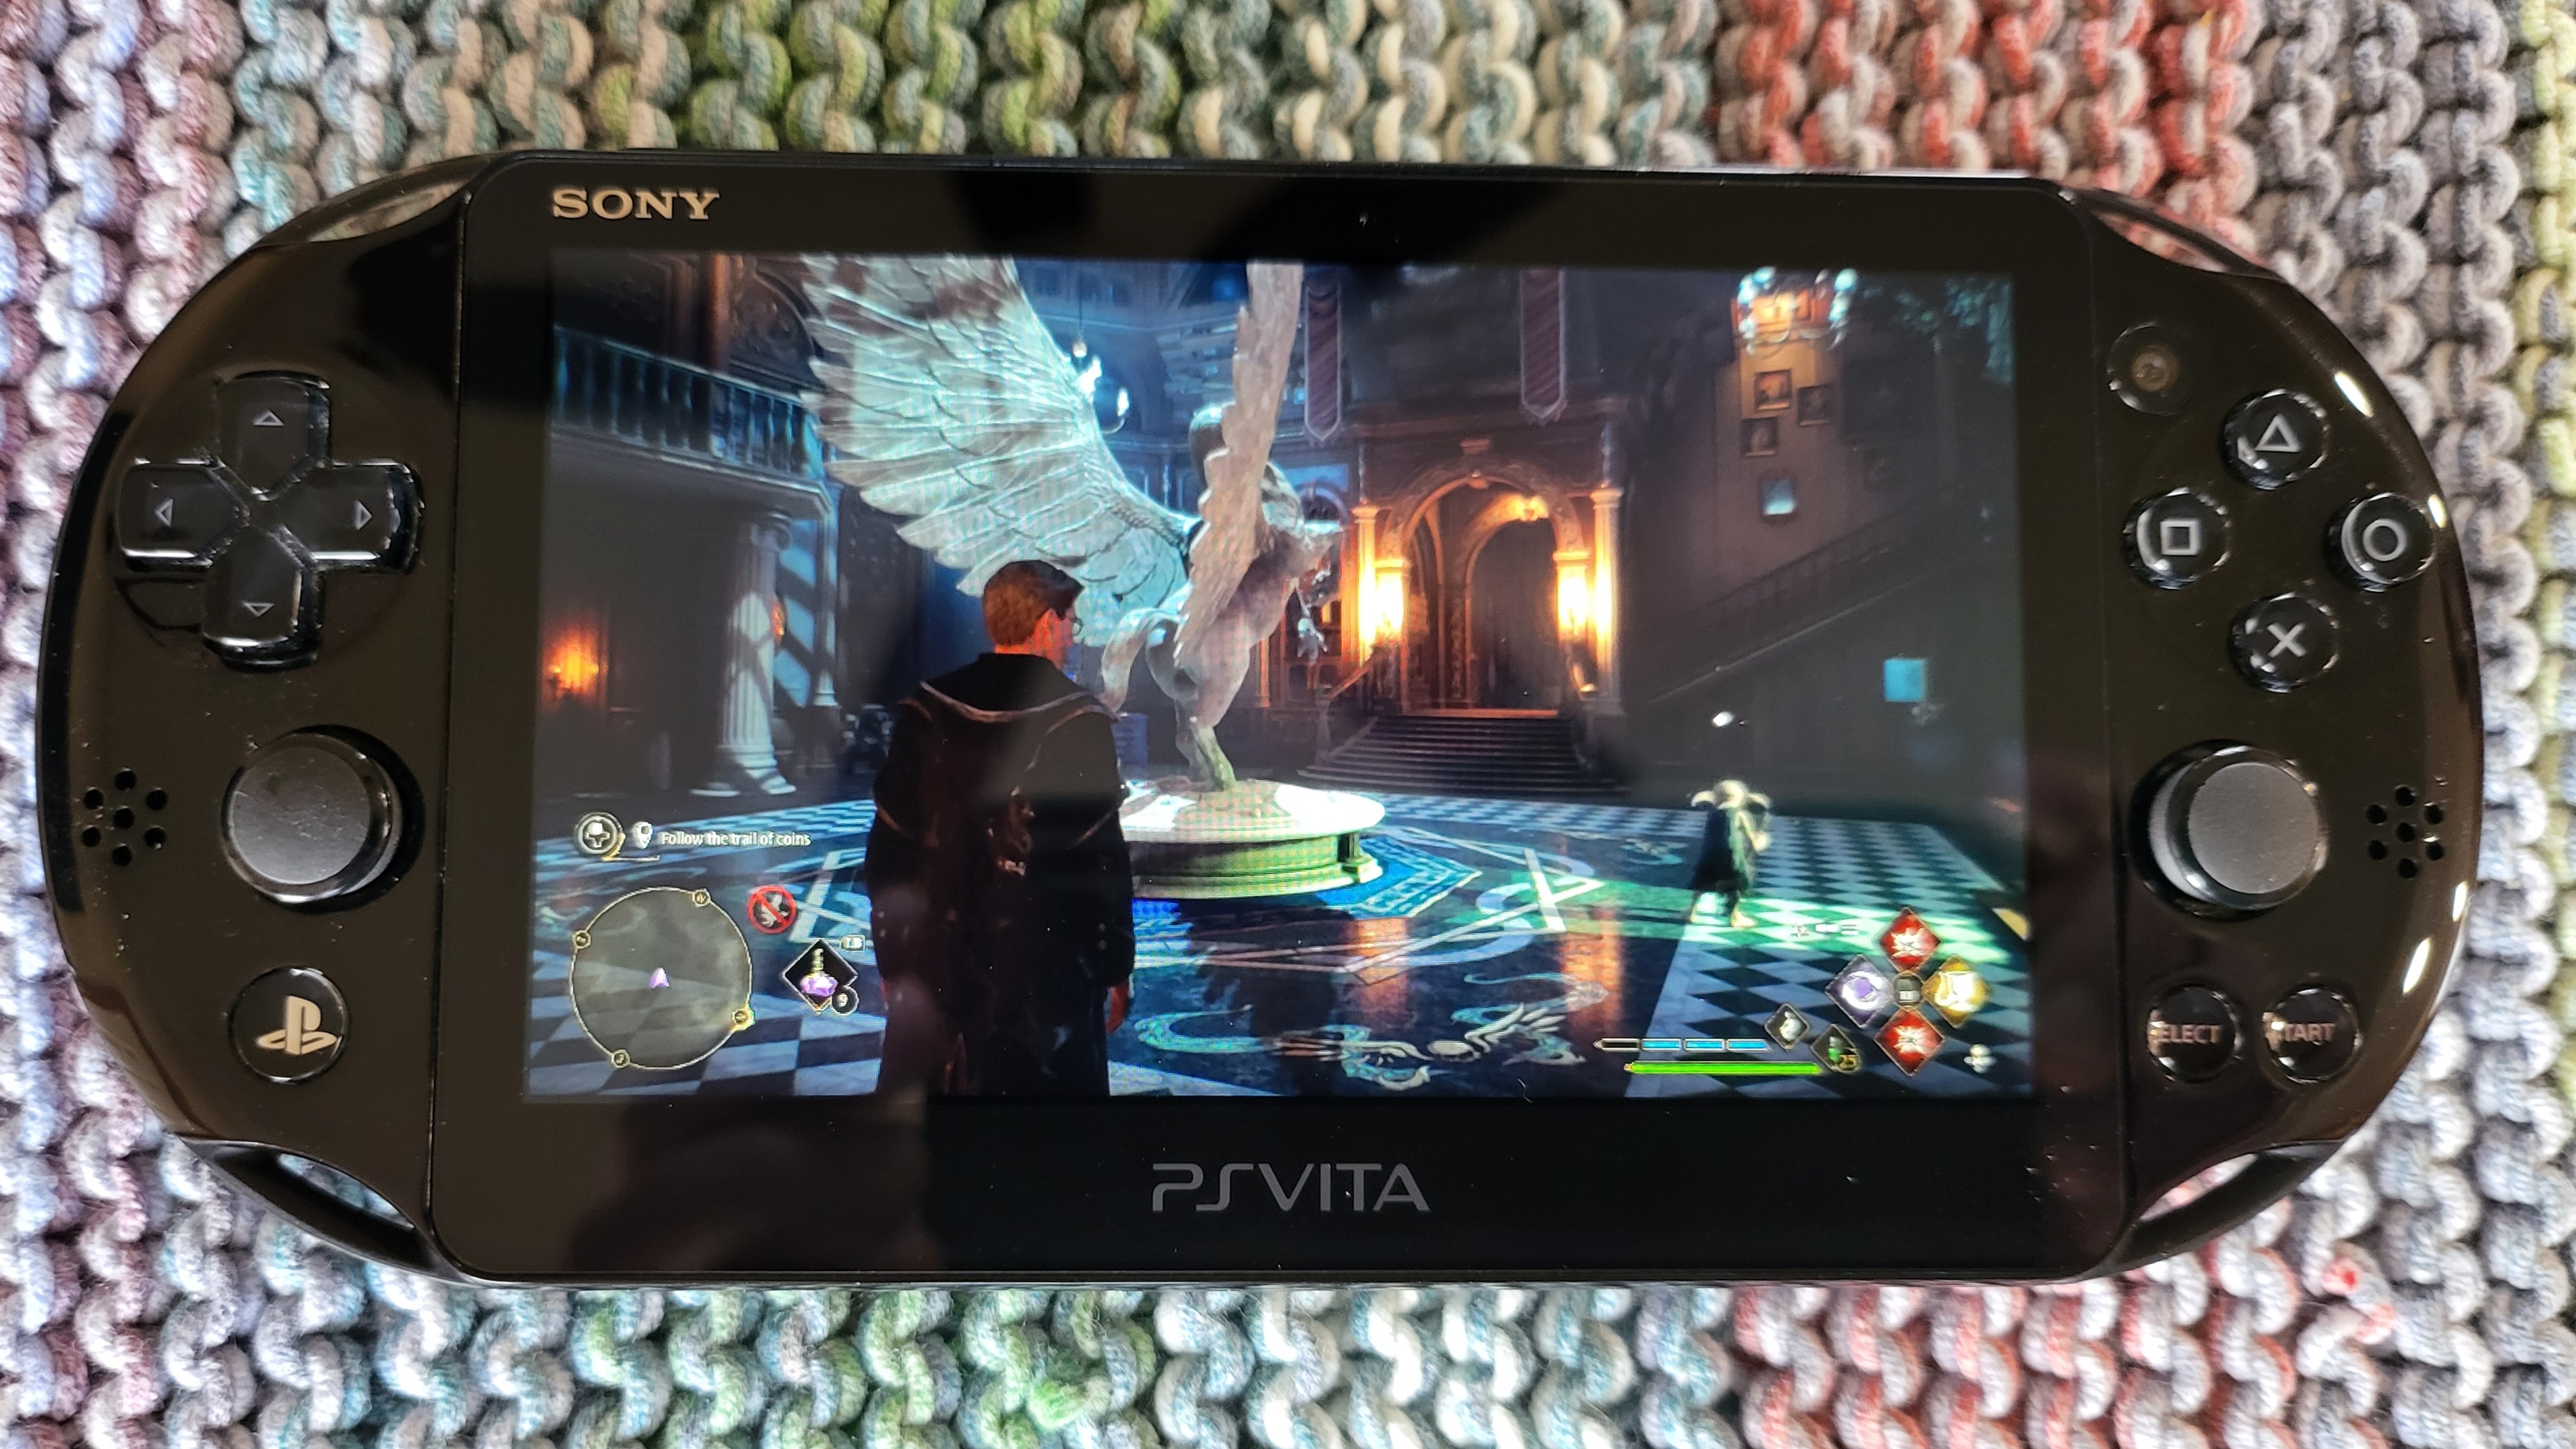 Turn A PlayStation Vita into the Perfect Game Streaming and